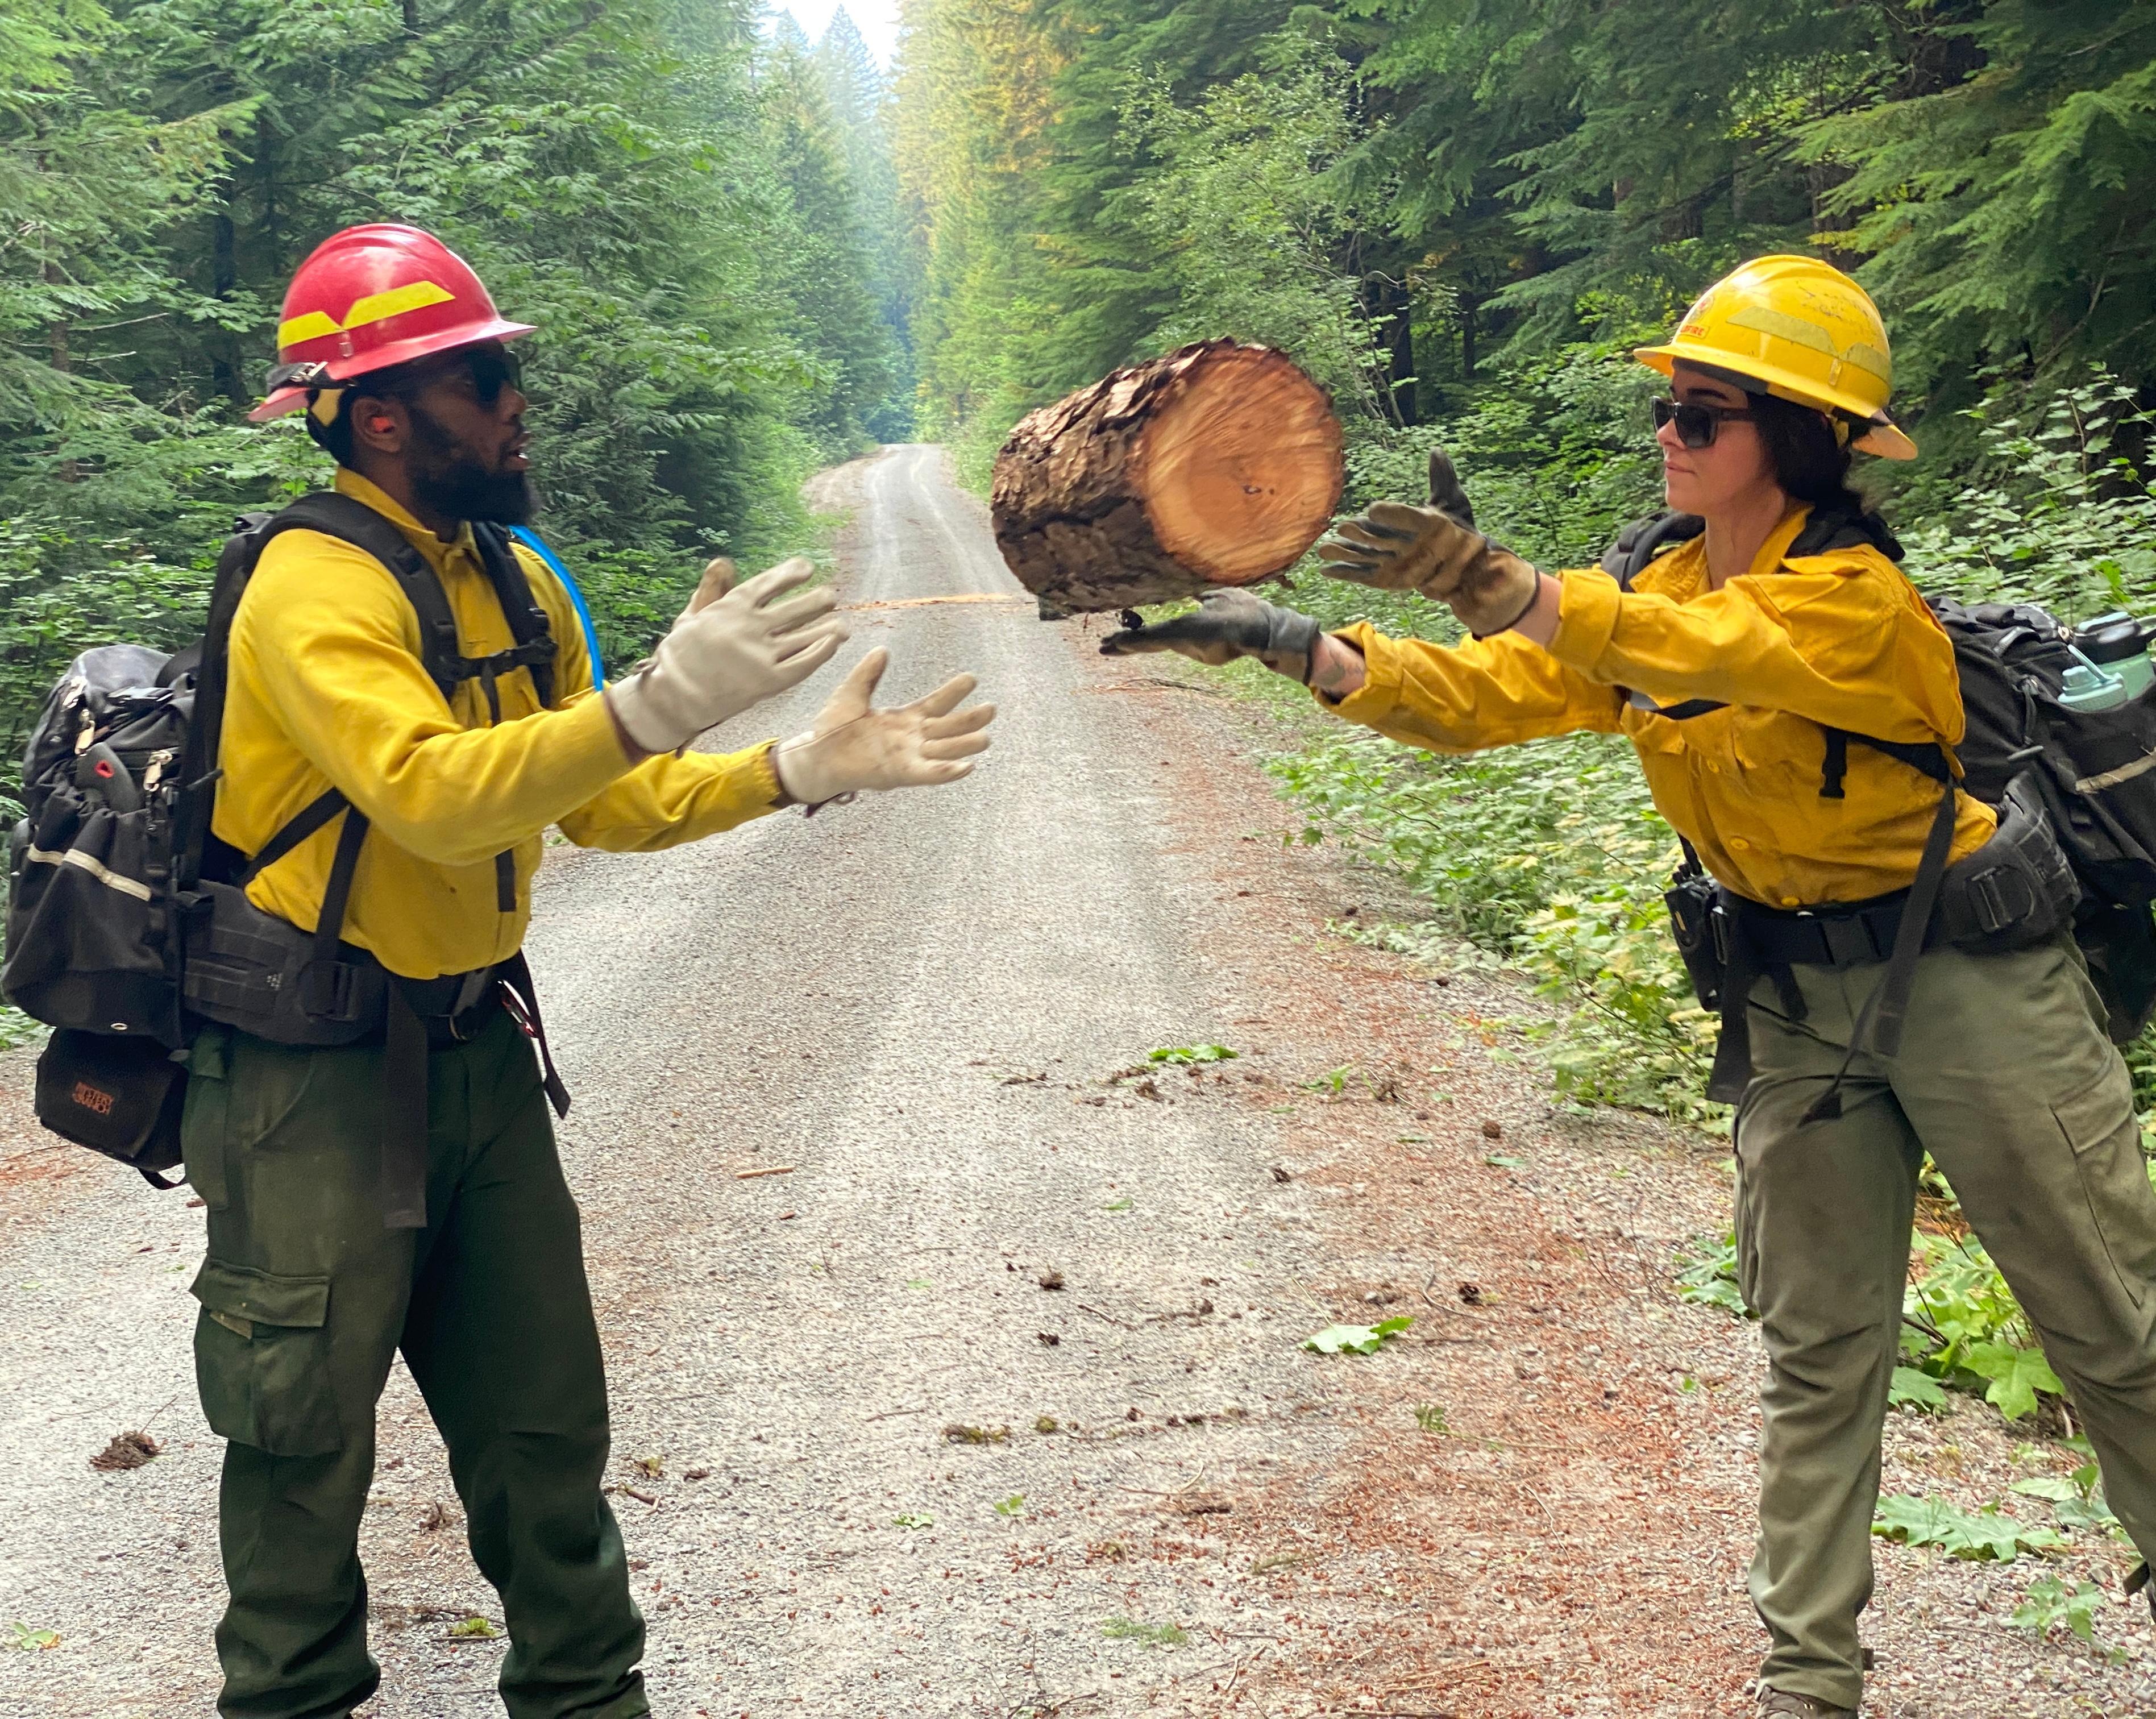 Two firefighters in protective clothing, are seen on a road with a log in the air betweeen them.